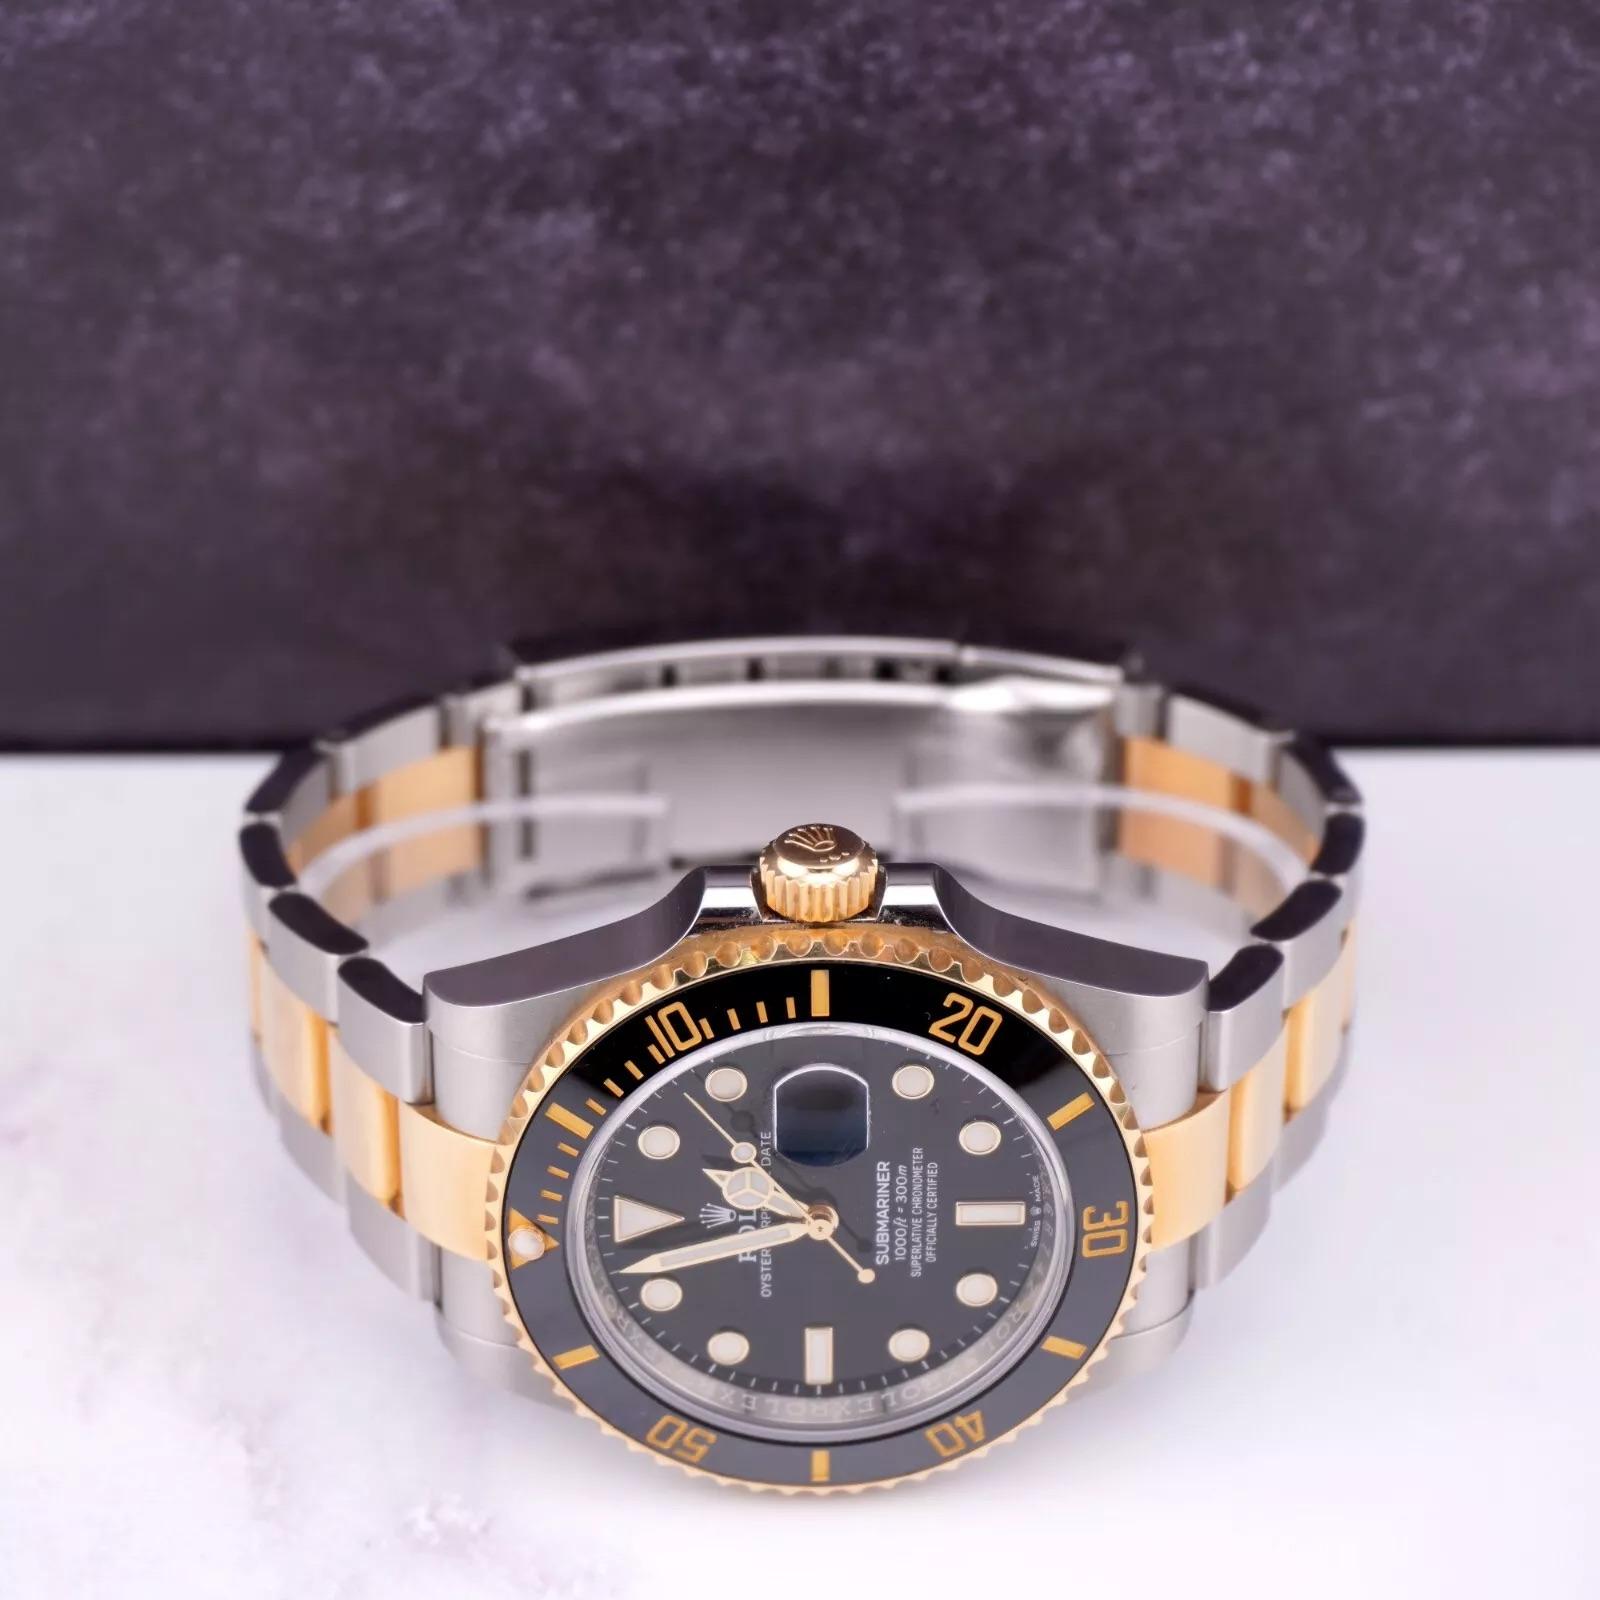 Rolex Submariner Date 40mm Watch

Pre-owned w/ Original Box & Card
100% Authentic Authenticity Card
Condition - (Excellent Condition) - See Pics
Watch Reference - 126613LN
Model - Submariner
Dial Color - Black
Material - 18k Yellow Gold/Stainless